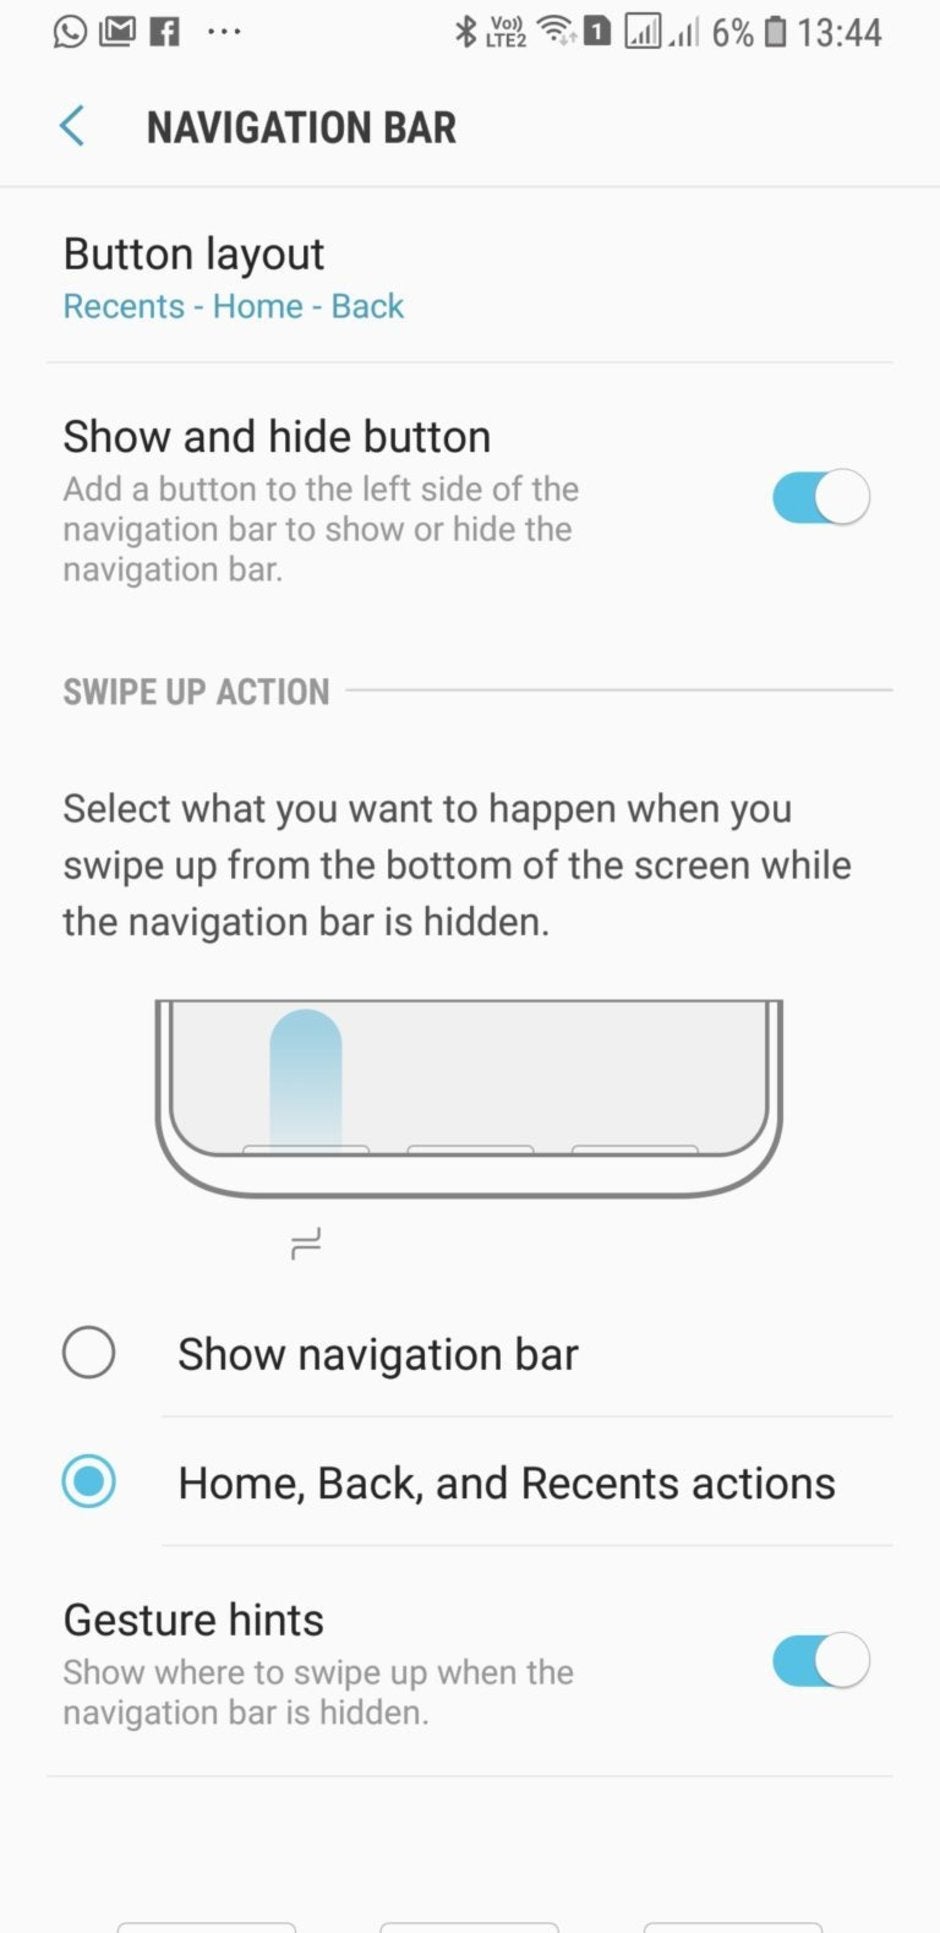 New Note 9 UI will have a gesture-only navigation option, too - Note 9's Android Pie interface leaks tease a dark theme, gesture navigation